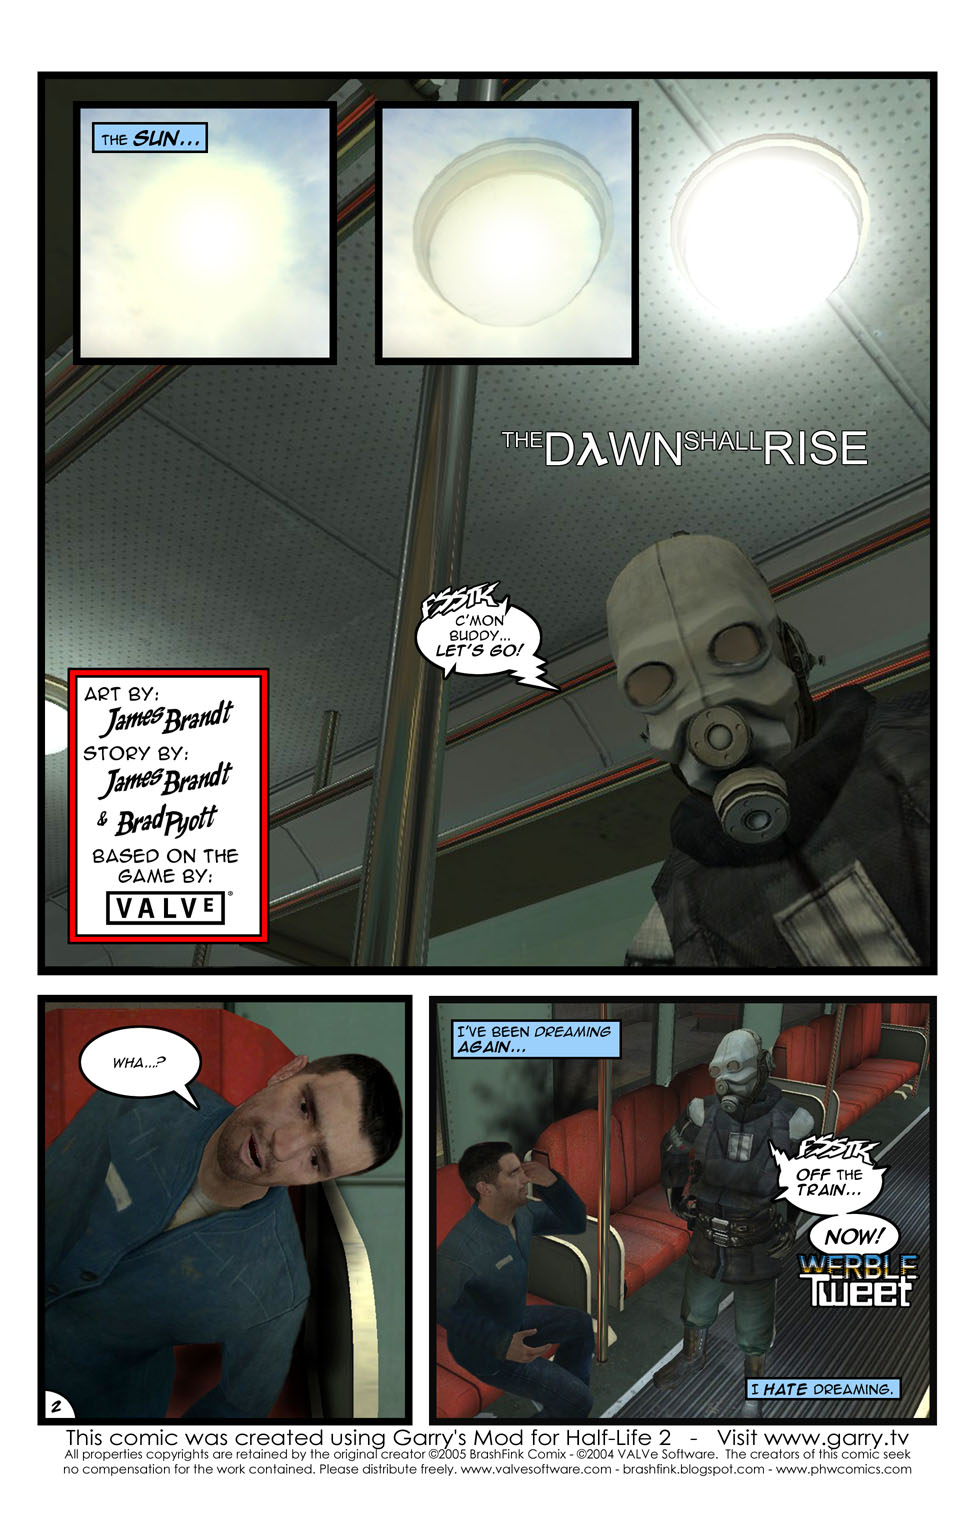 A page from Apostasy #1. The Sun morphs into a harsh overhead light inside a train. A masked man - a Civil Protection officer of the Combine thought police - is waking up our protagonist, a man in a standard-issue blue civilian outfit. The Civil Protection officer forces him out of the train as the man thinks to himself that he hates dreaming.